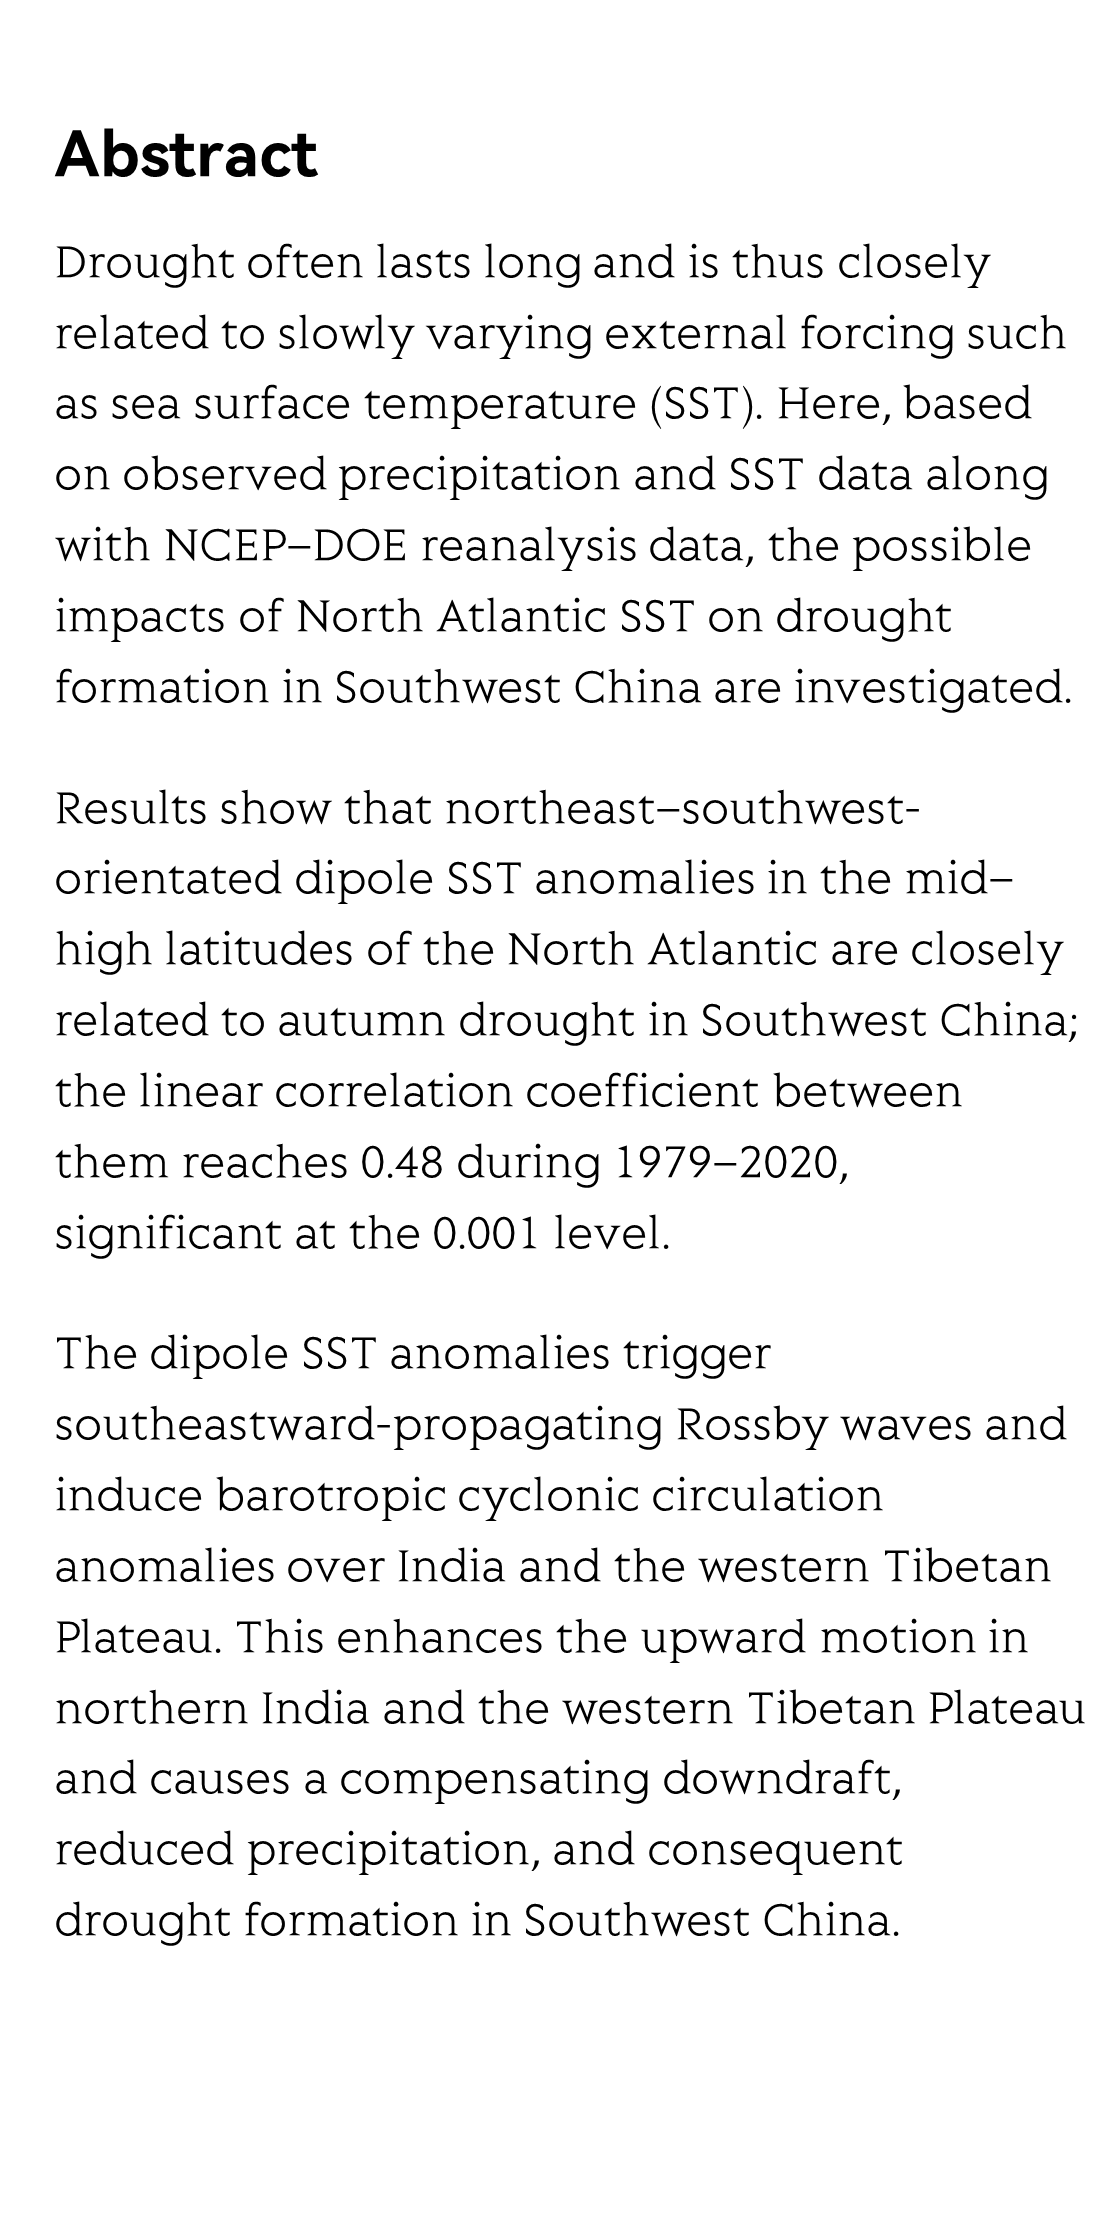 North Atlantic forcing of autumn drought in Southwest China_2